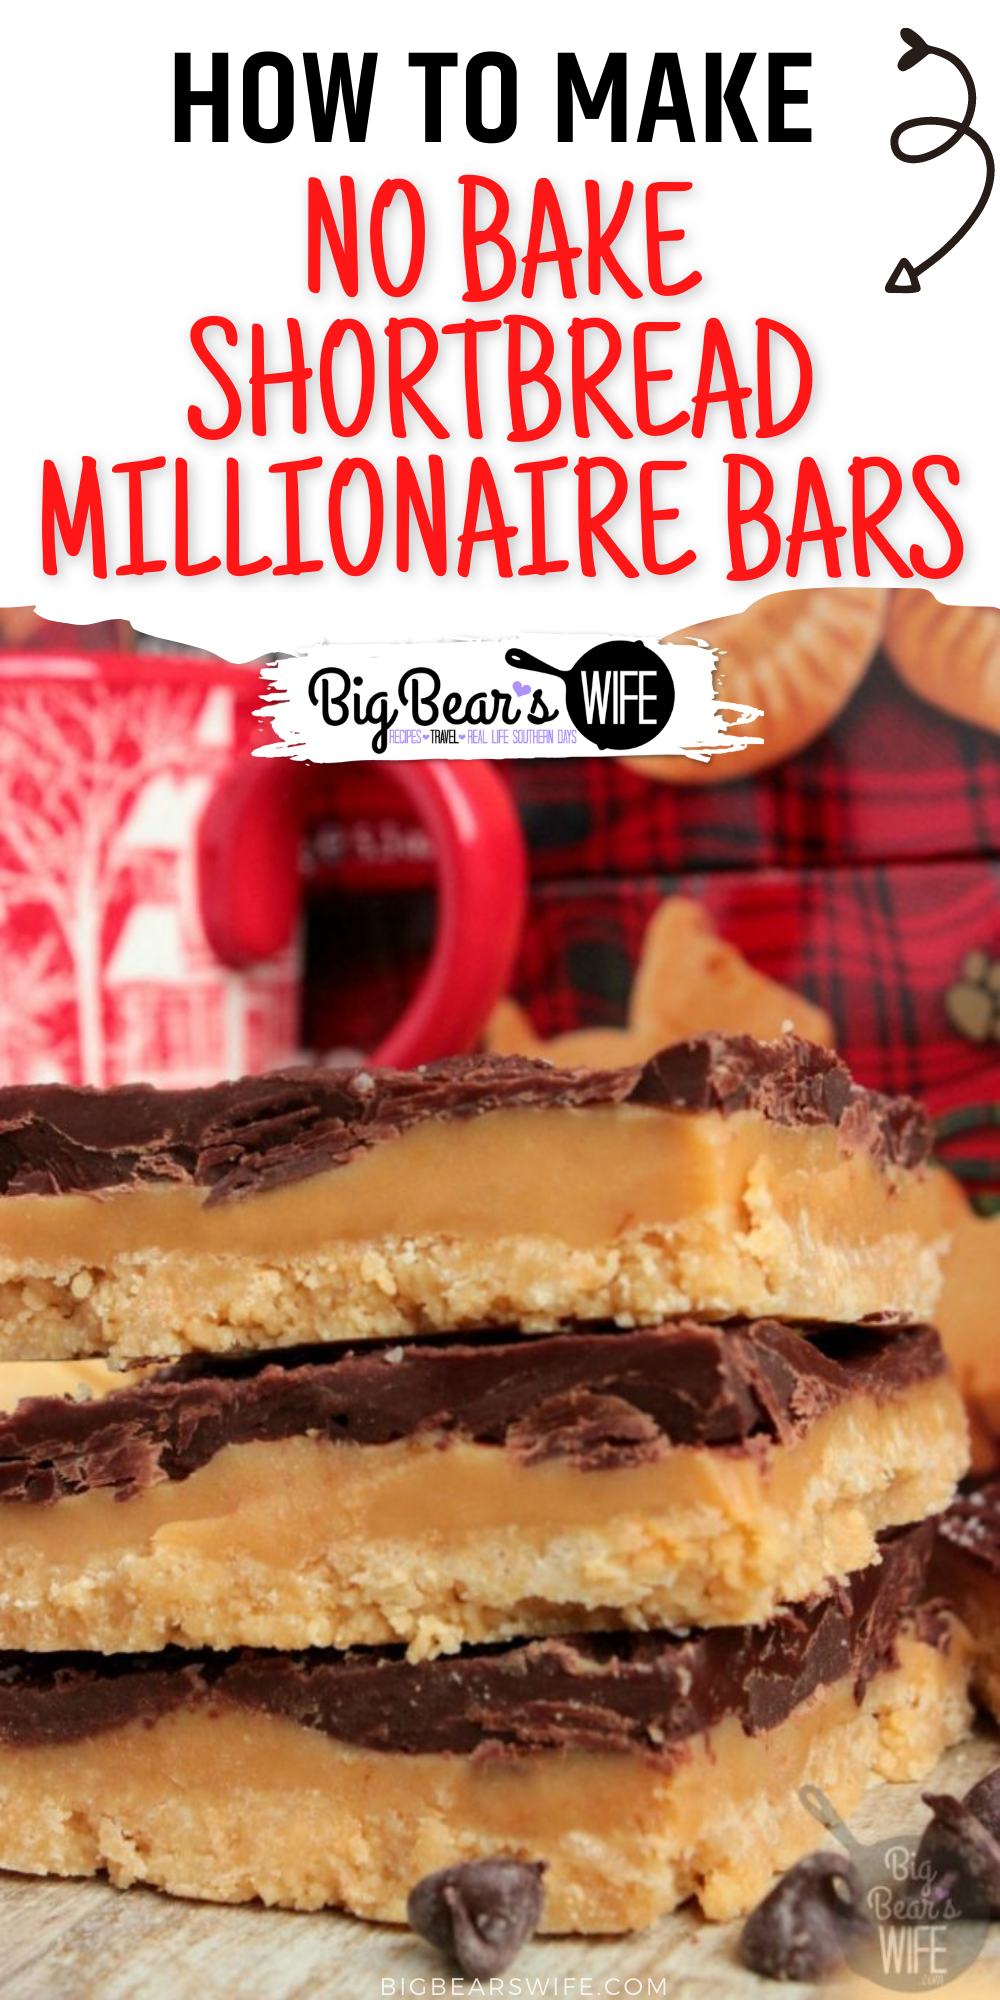 Shortbread cookies, homemade caramel and melted chocolate are layered together to create these perfect No Bake Shortbread Millionaire Bars! via @bigbearswife